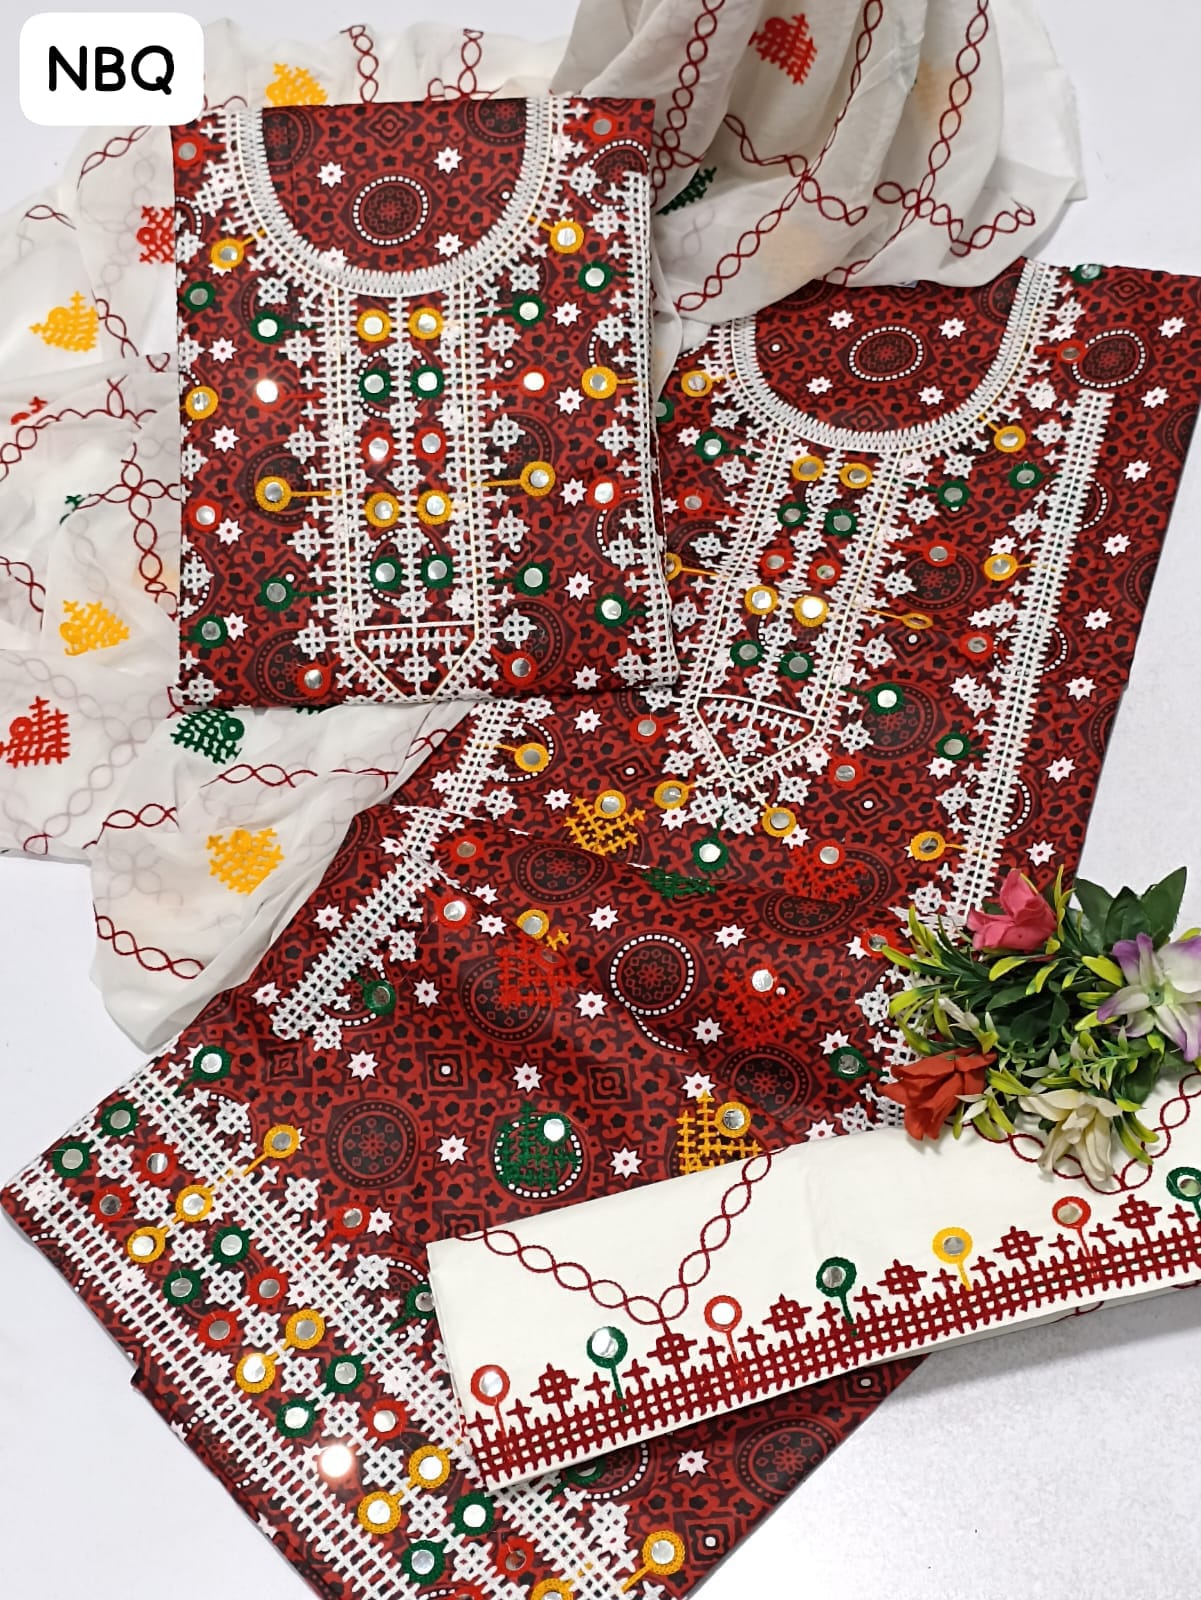 Soft Lawn Fabric Ajrak Print Computer Multi Sindhi Gala with Heavy Daman Embroided Shirt With White Contras Heavy Embroided Chiffon Dupatta And Lawn White Contras Heavy Embroided Trouser 3Pc Dress